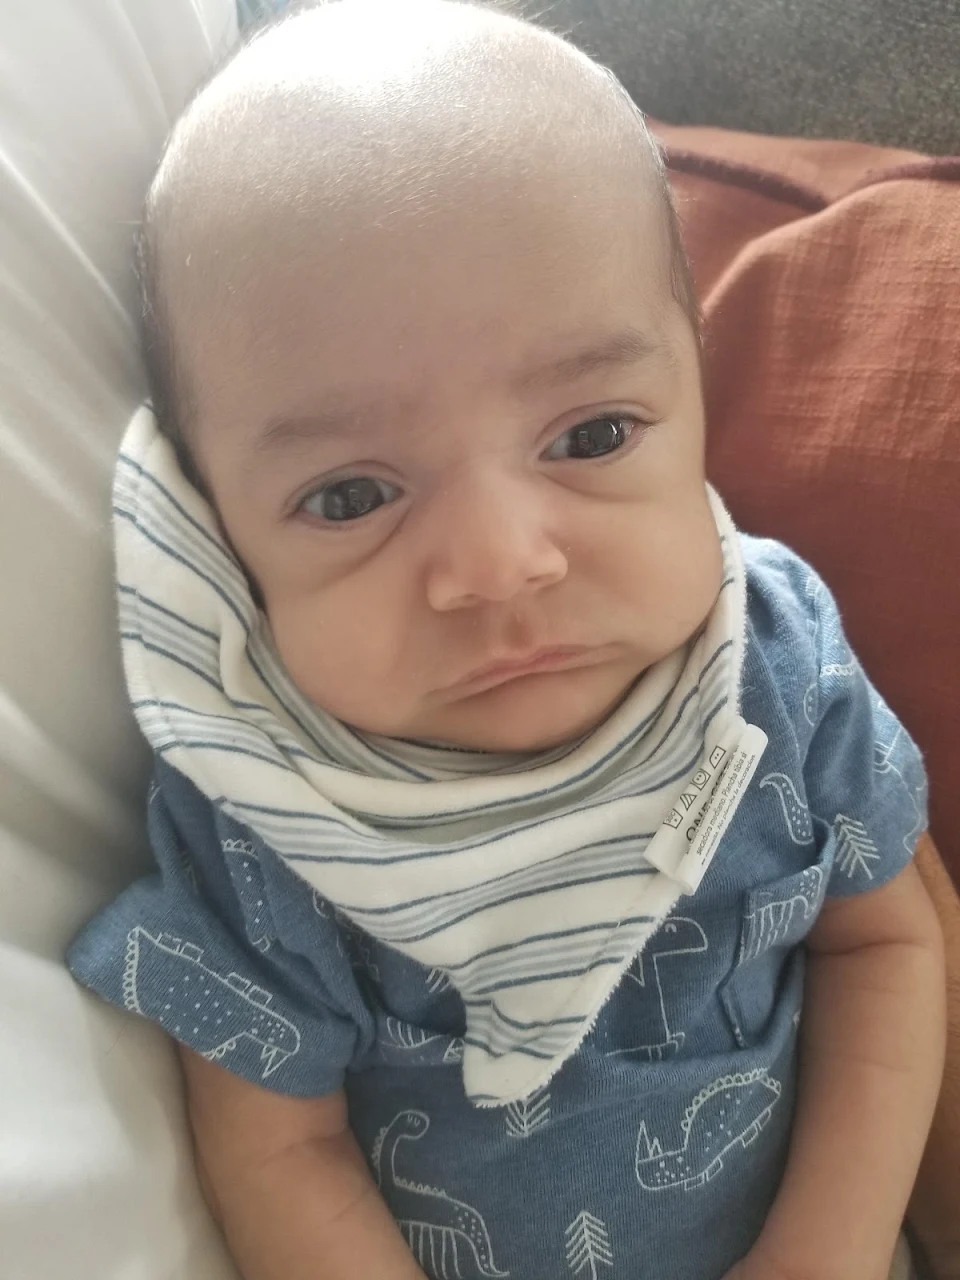 Newborn looking like a middle aged man that regrets some life choices